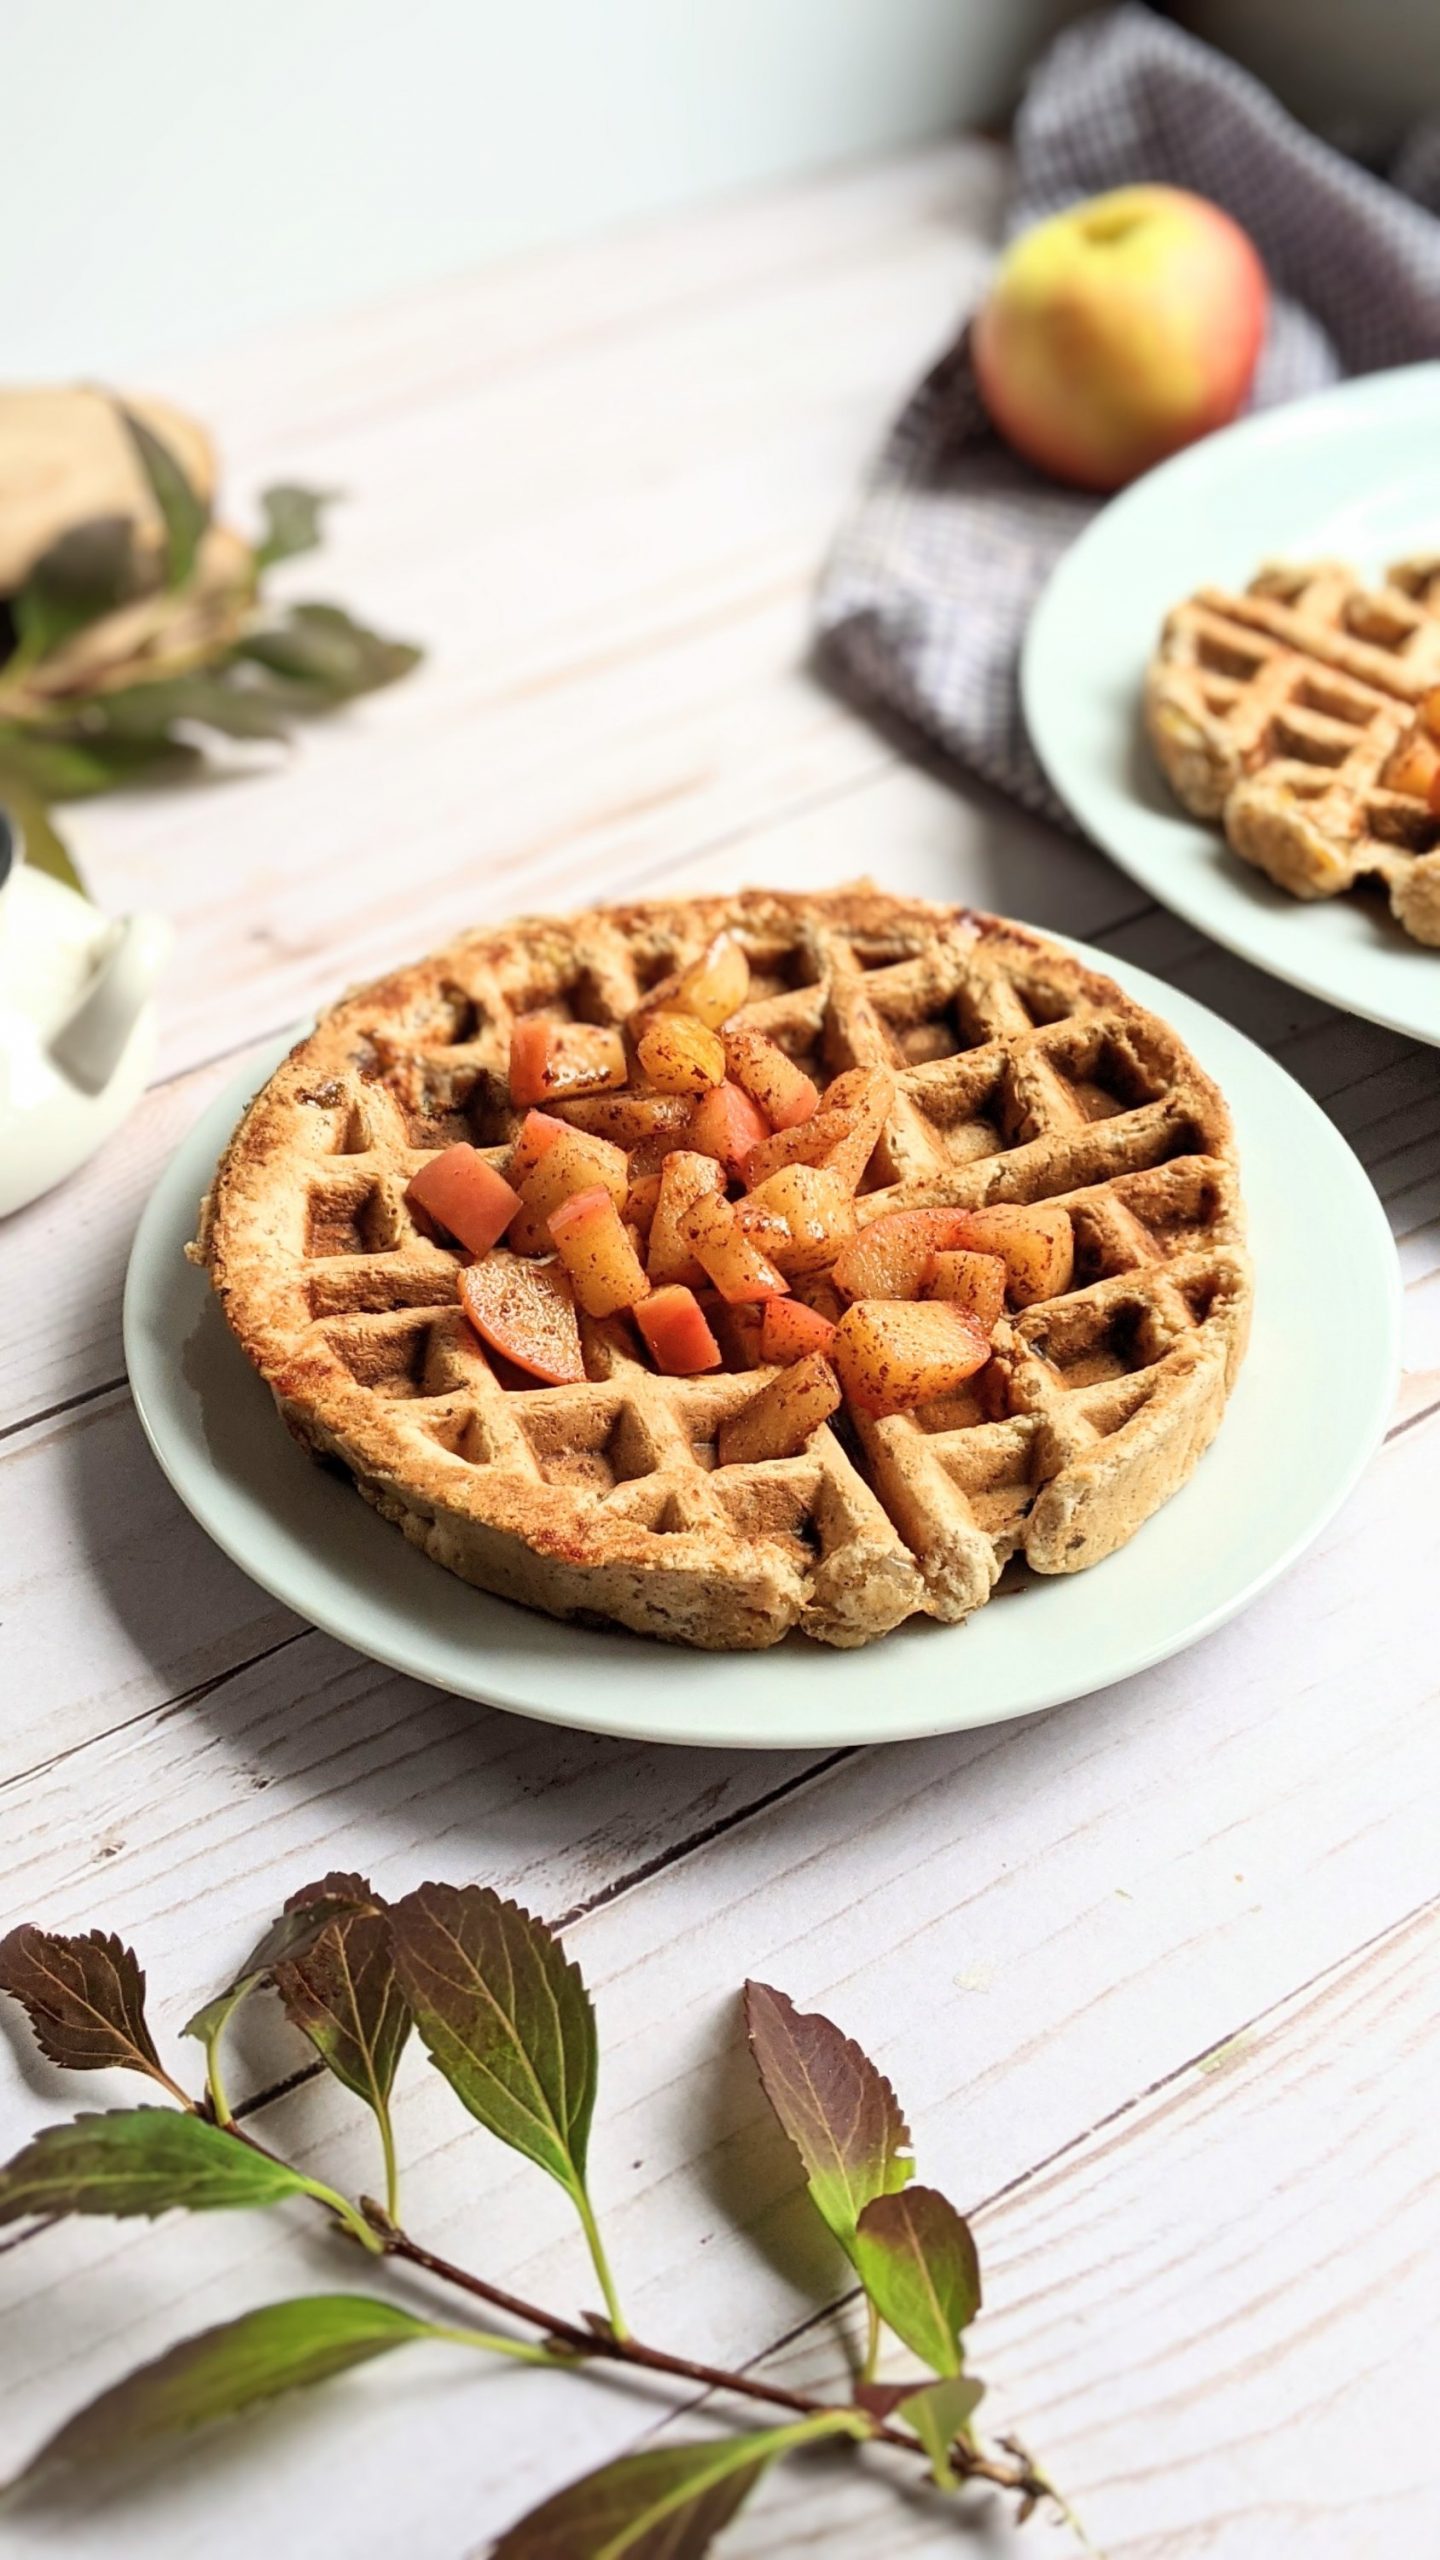 recipes for apple picking apples breakfast recipes for brunch with apples pie waffles with apple pie mix filling canned or homemade